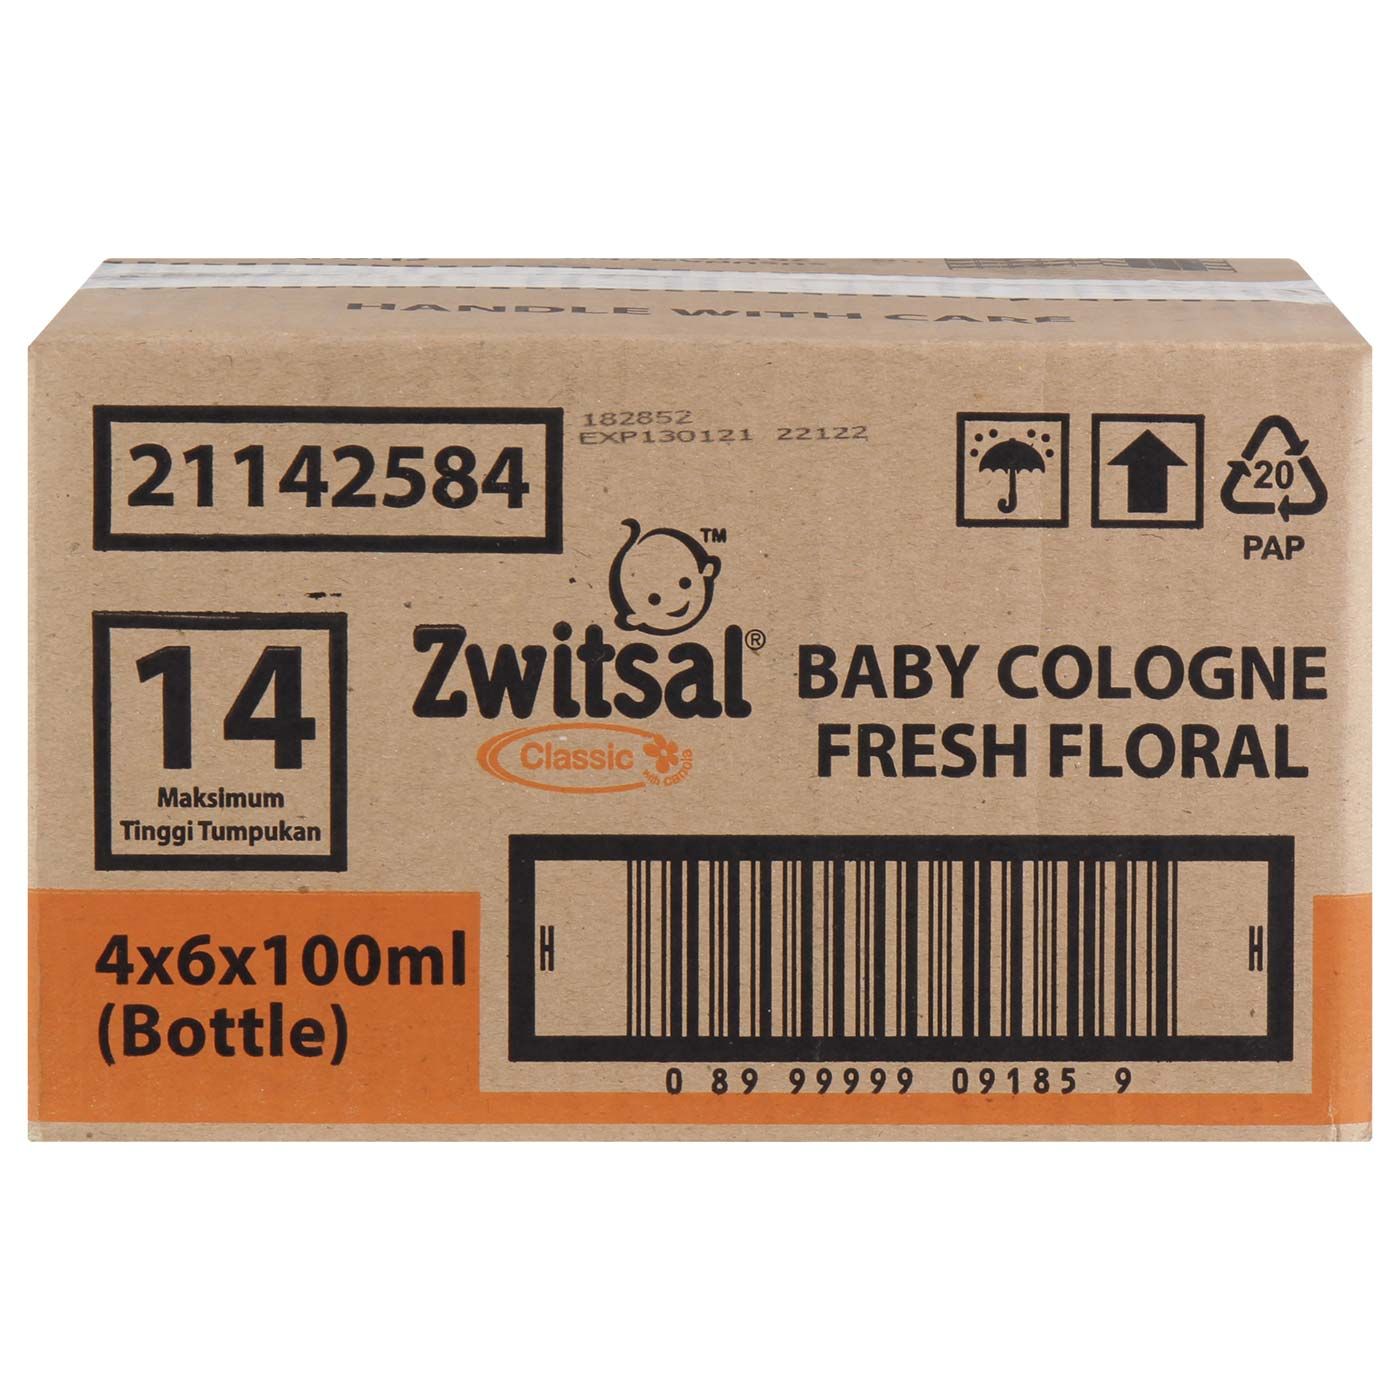 Zwitsal Baby Cologne New Fresh Floral 100ml - 4